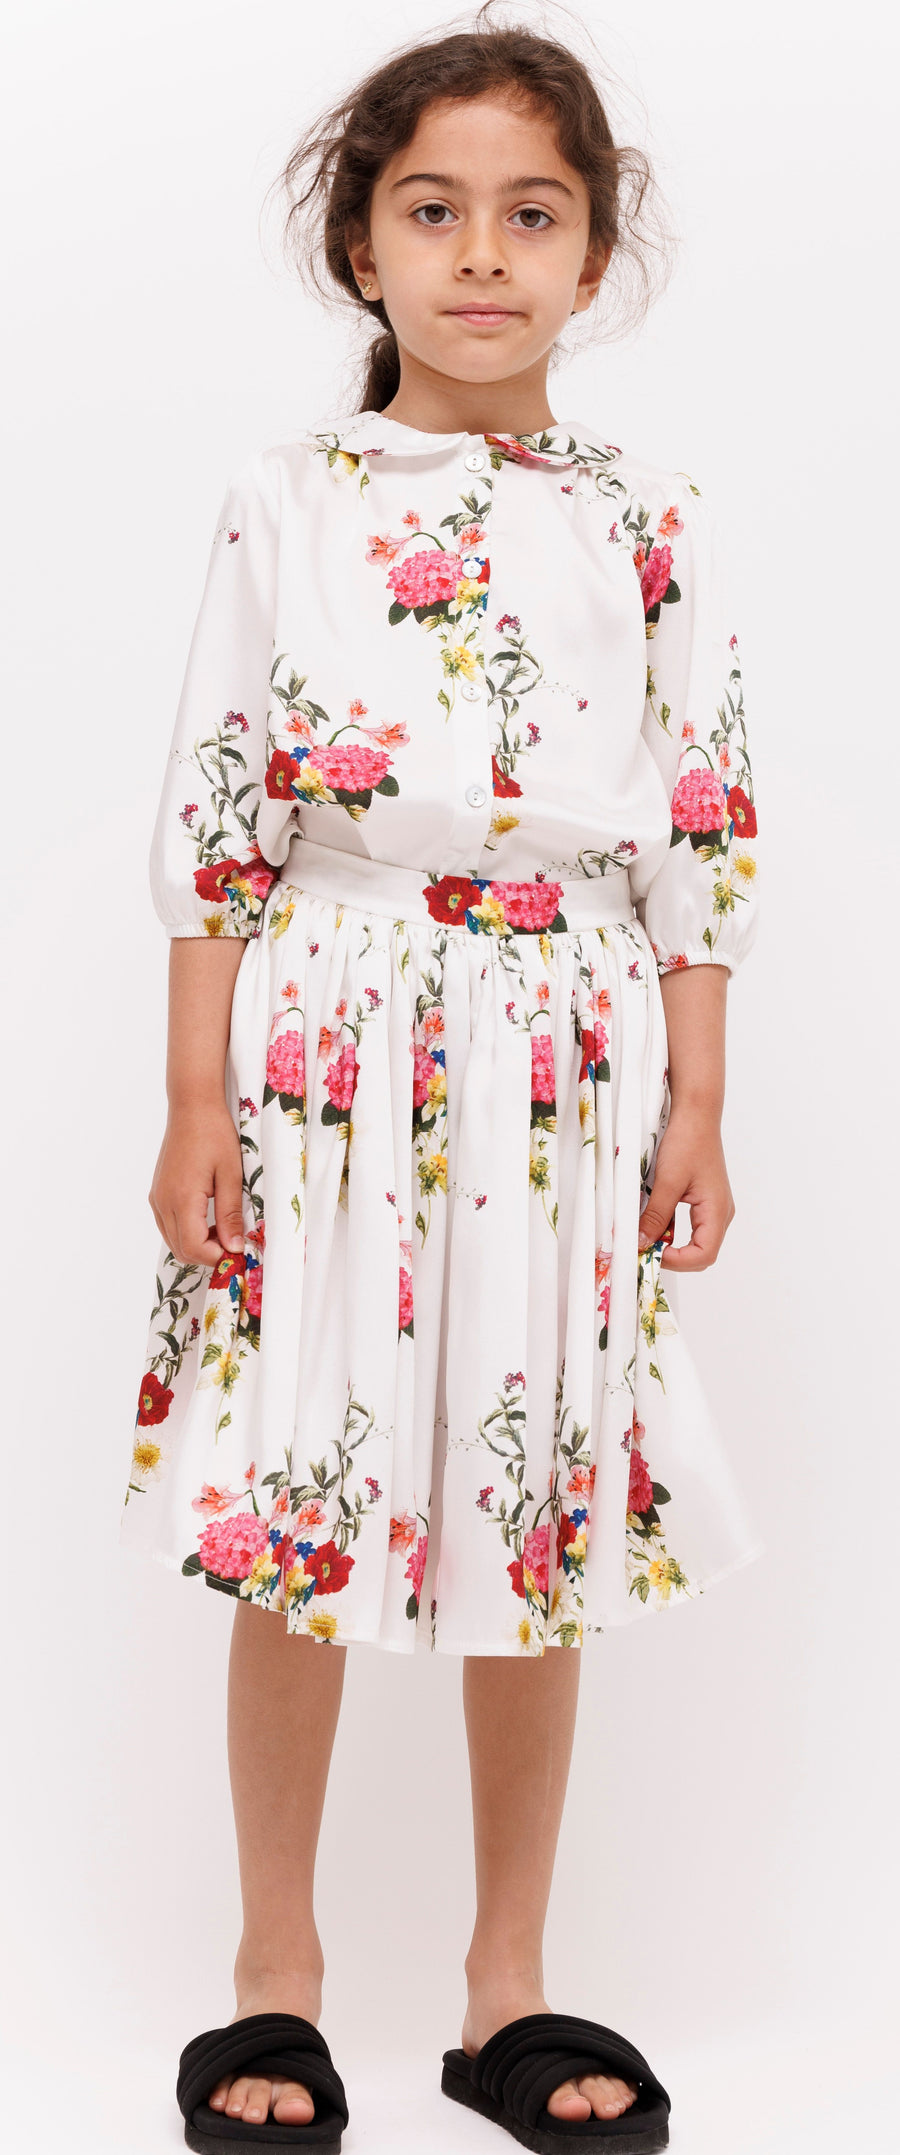 Blossoms Floral Top by Christina Rohde